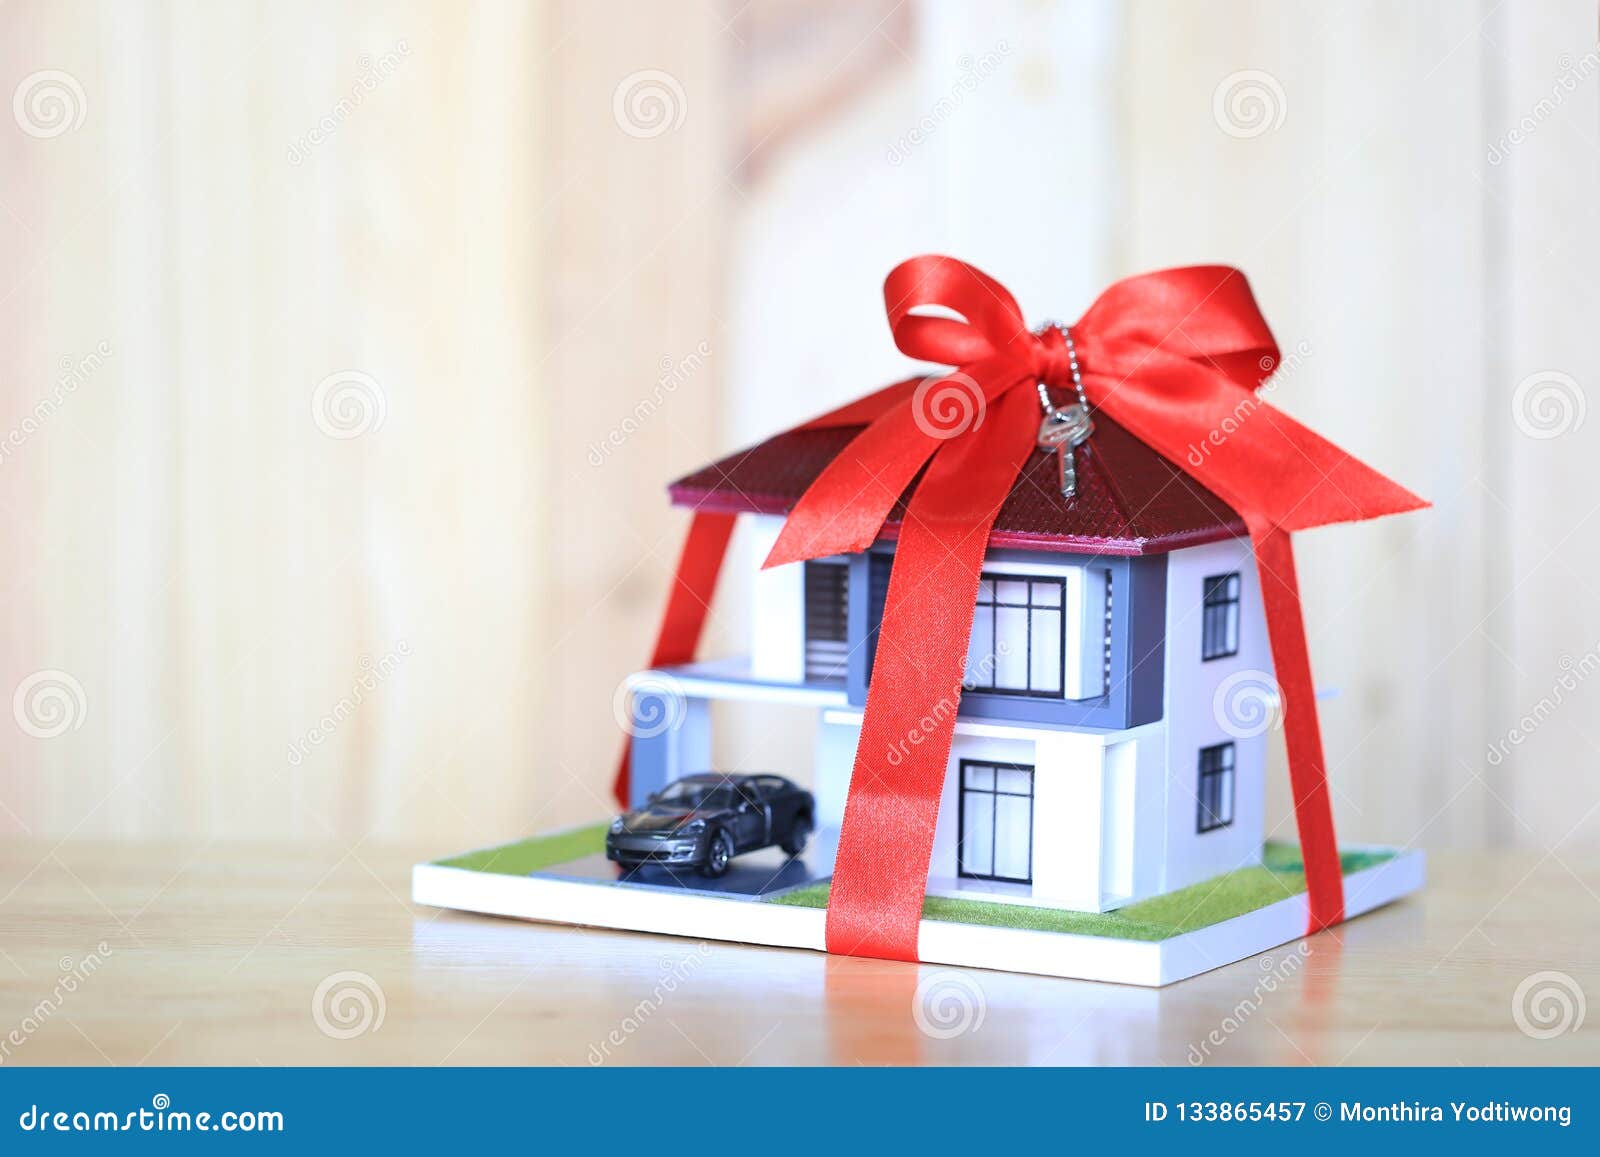 Real Estate and Gift New Home Concept,Model House with Red Ribbon and Key  on Wooder Background Stock Image - Image of broker, loan: 133865457